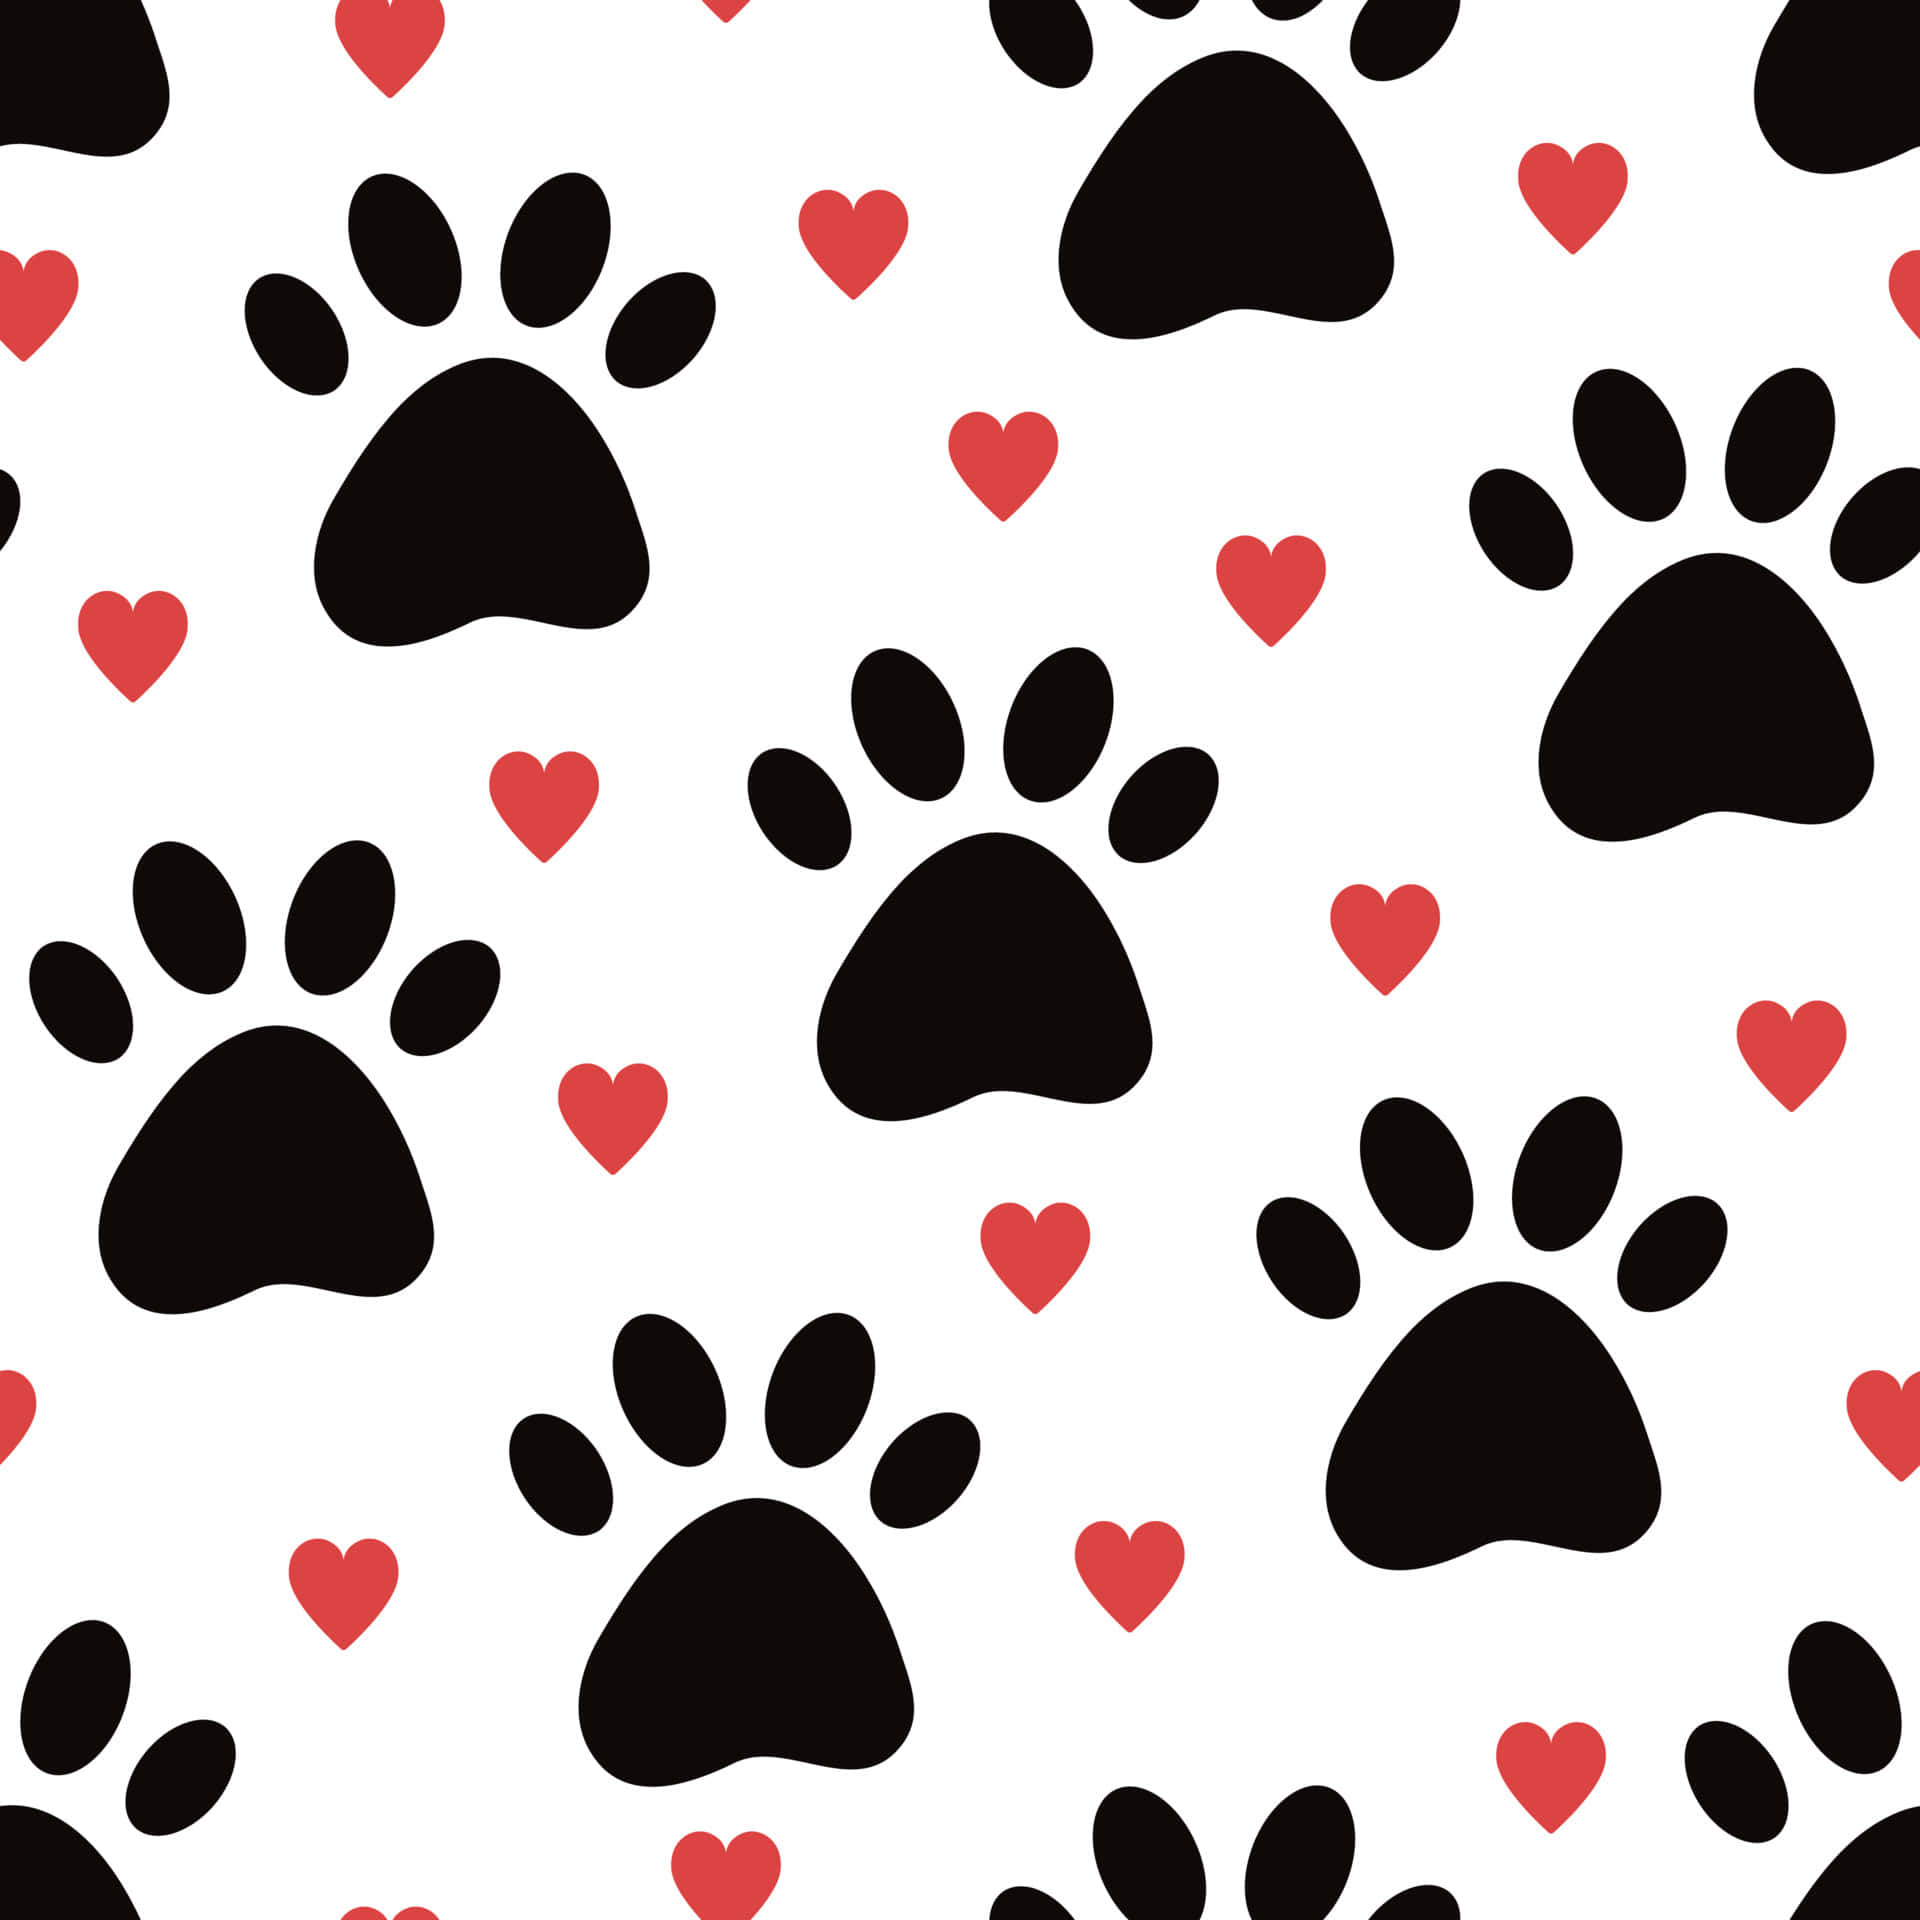 Paw Prints With Hearts On A White Background